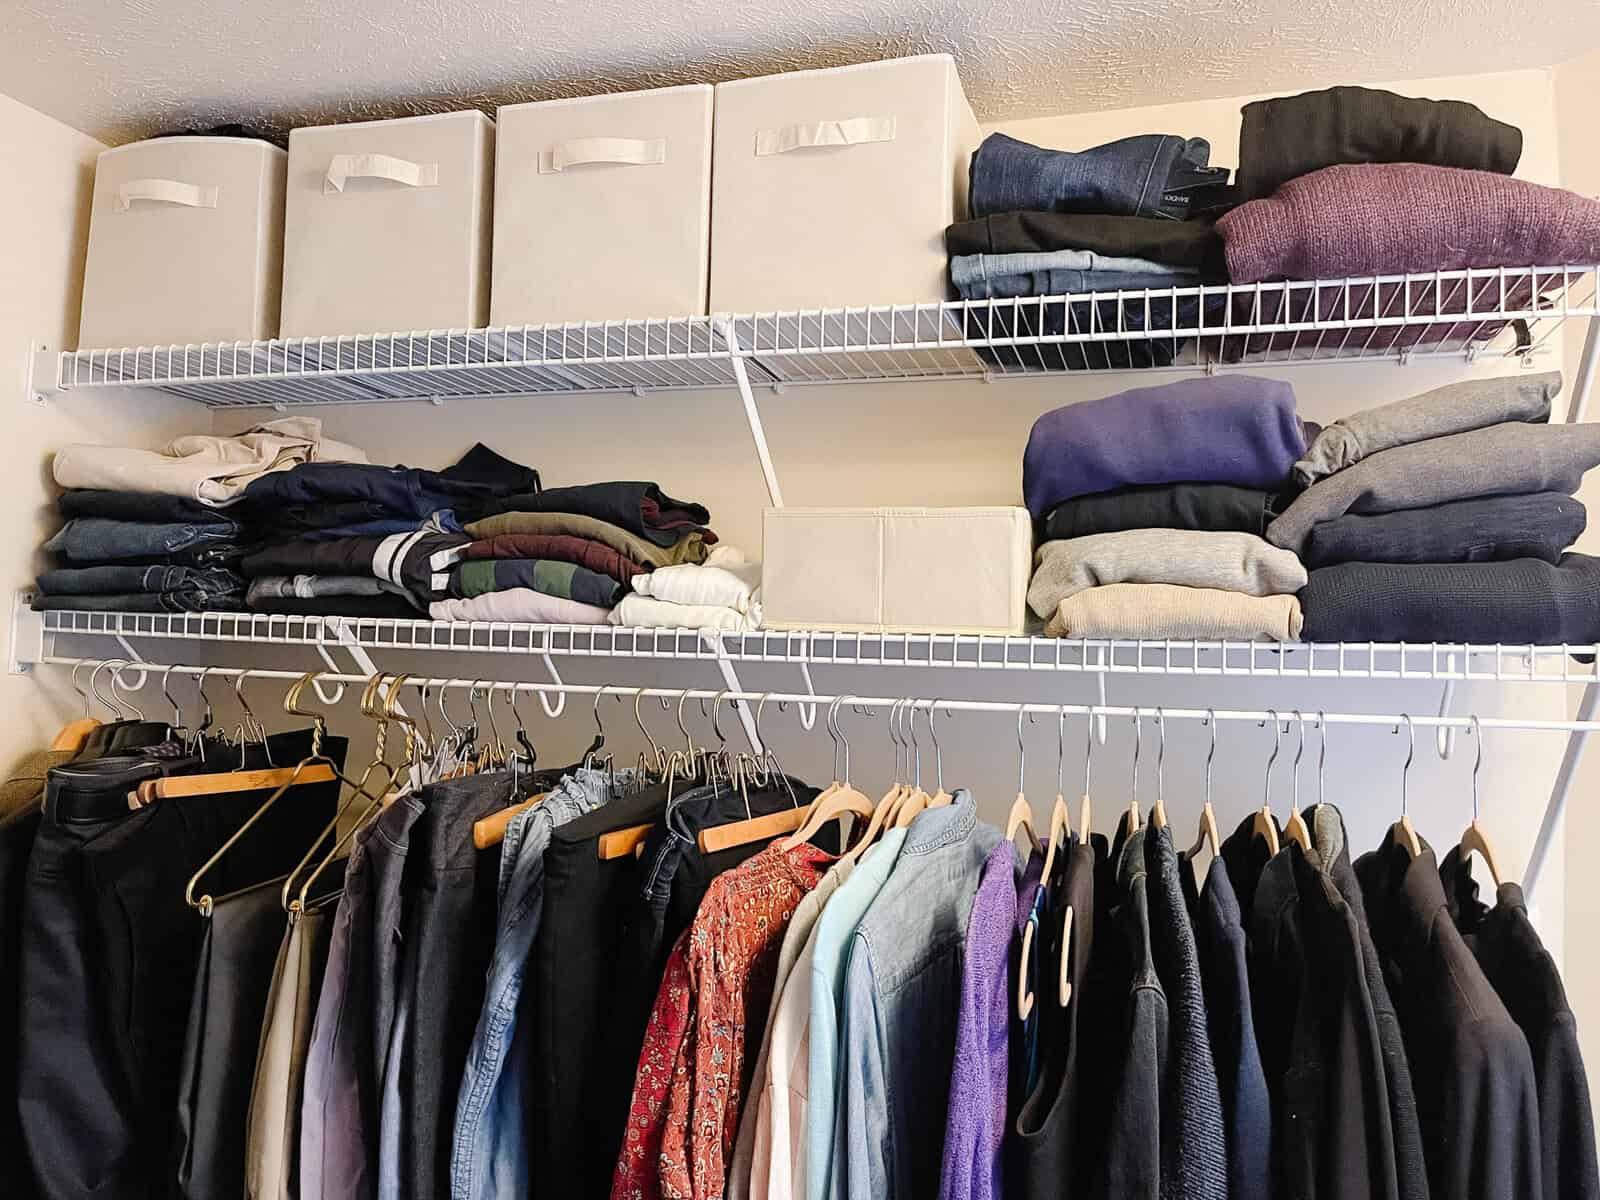 neatly folded and hanging clothes and organization boxes in closet